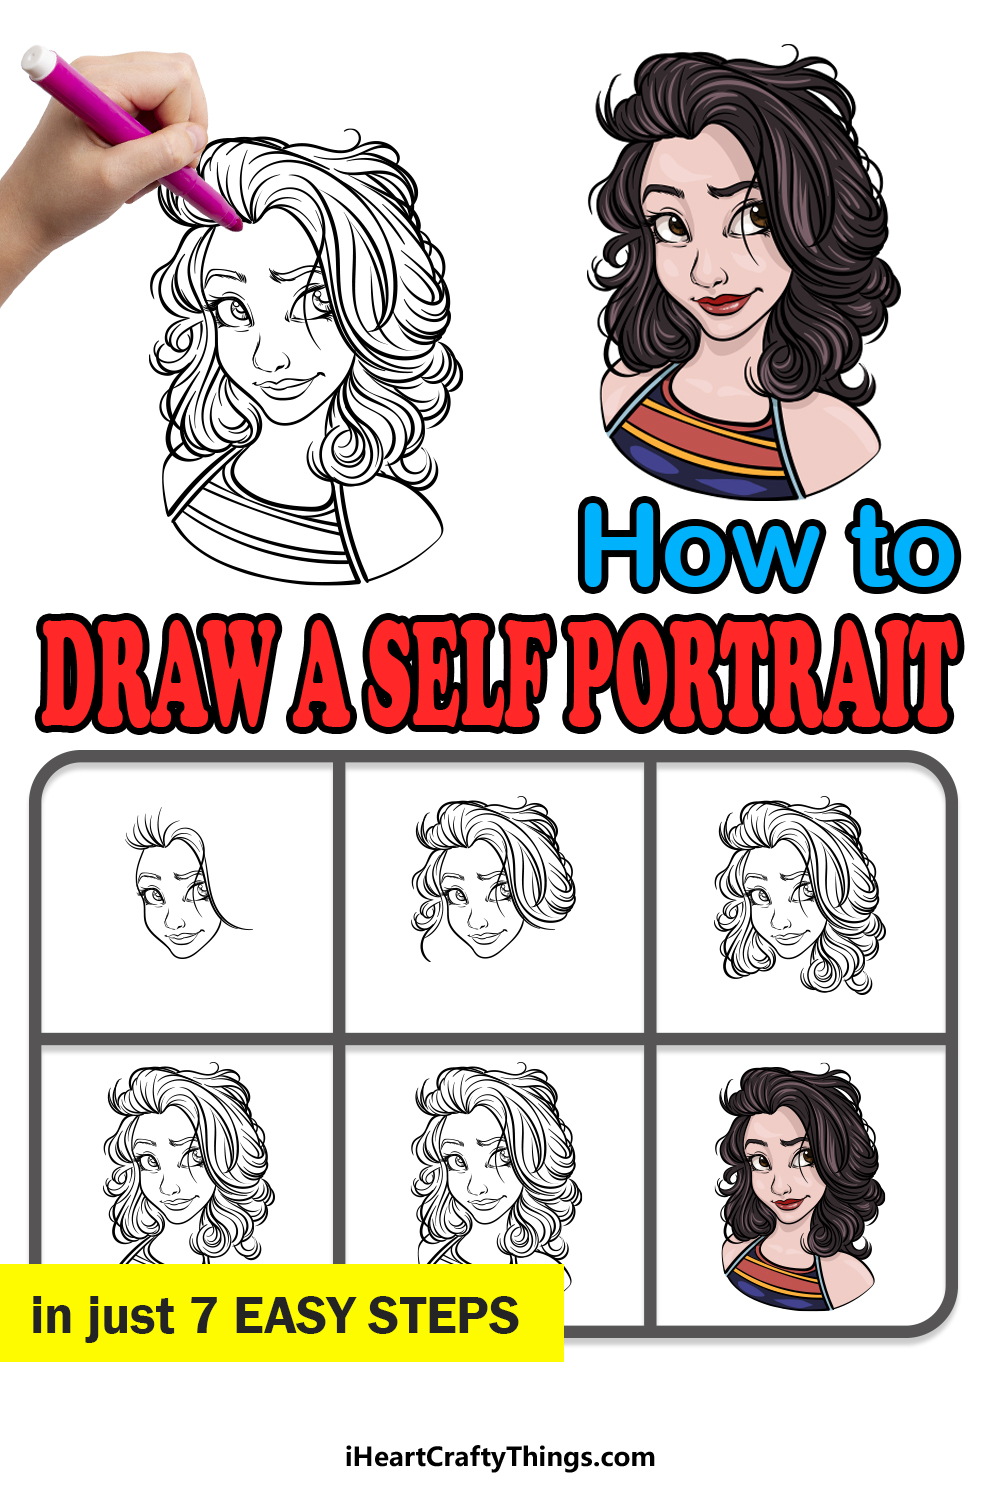 how to draw a Self Portrait in 7 easy steps